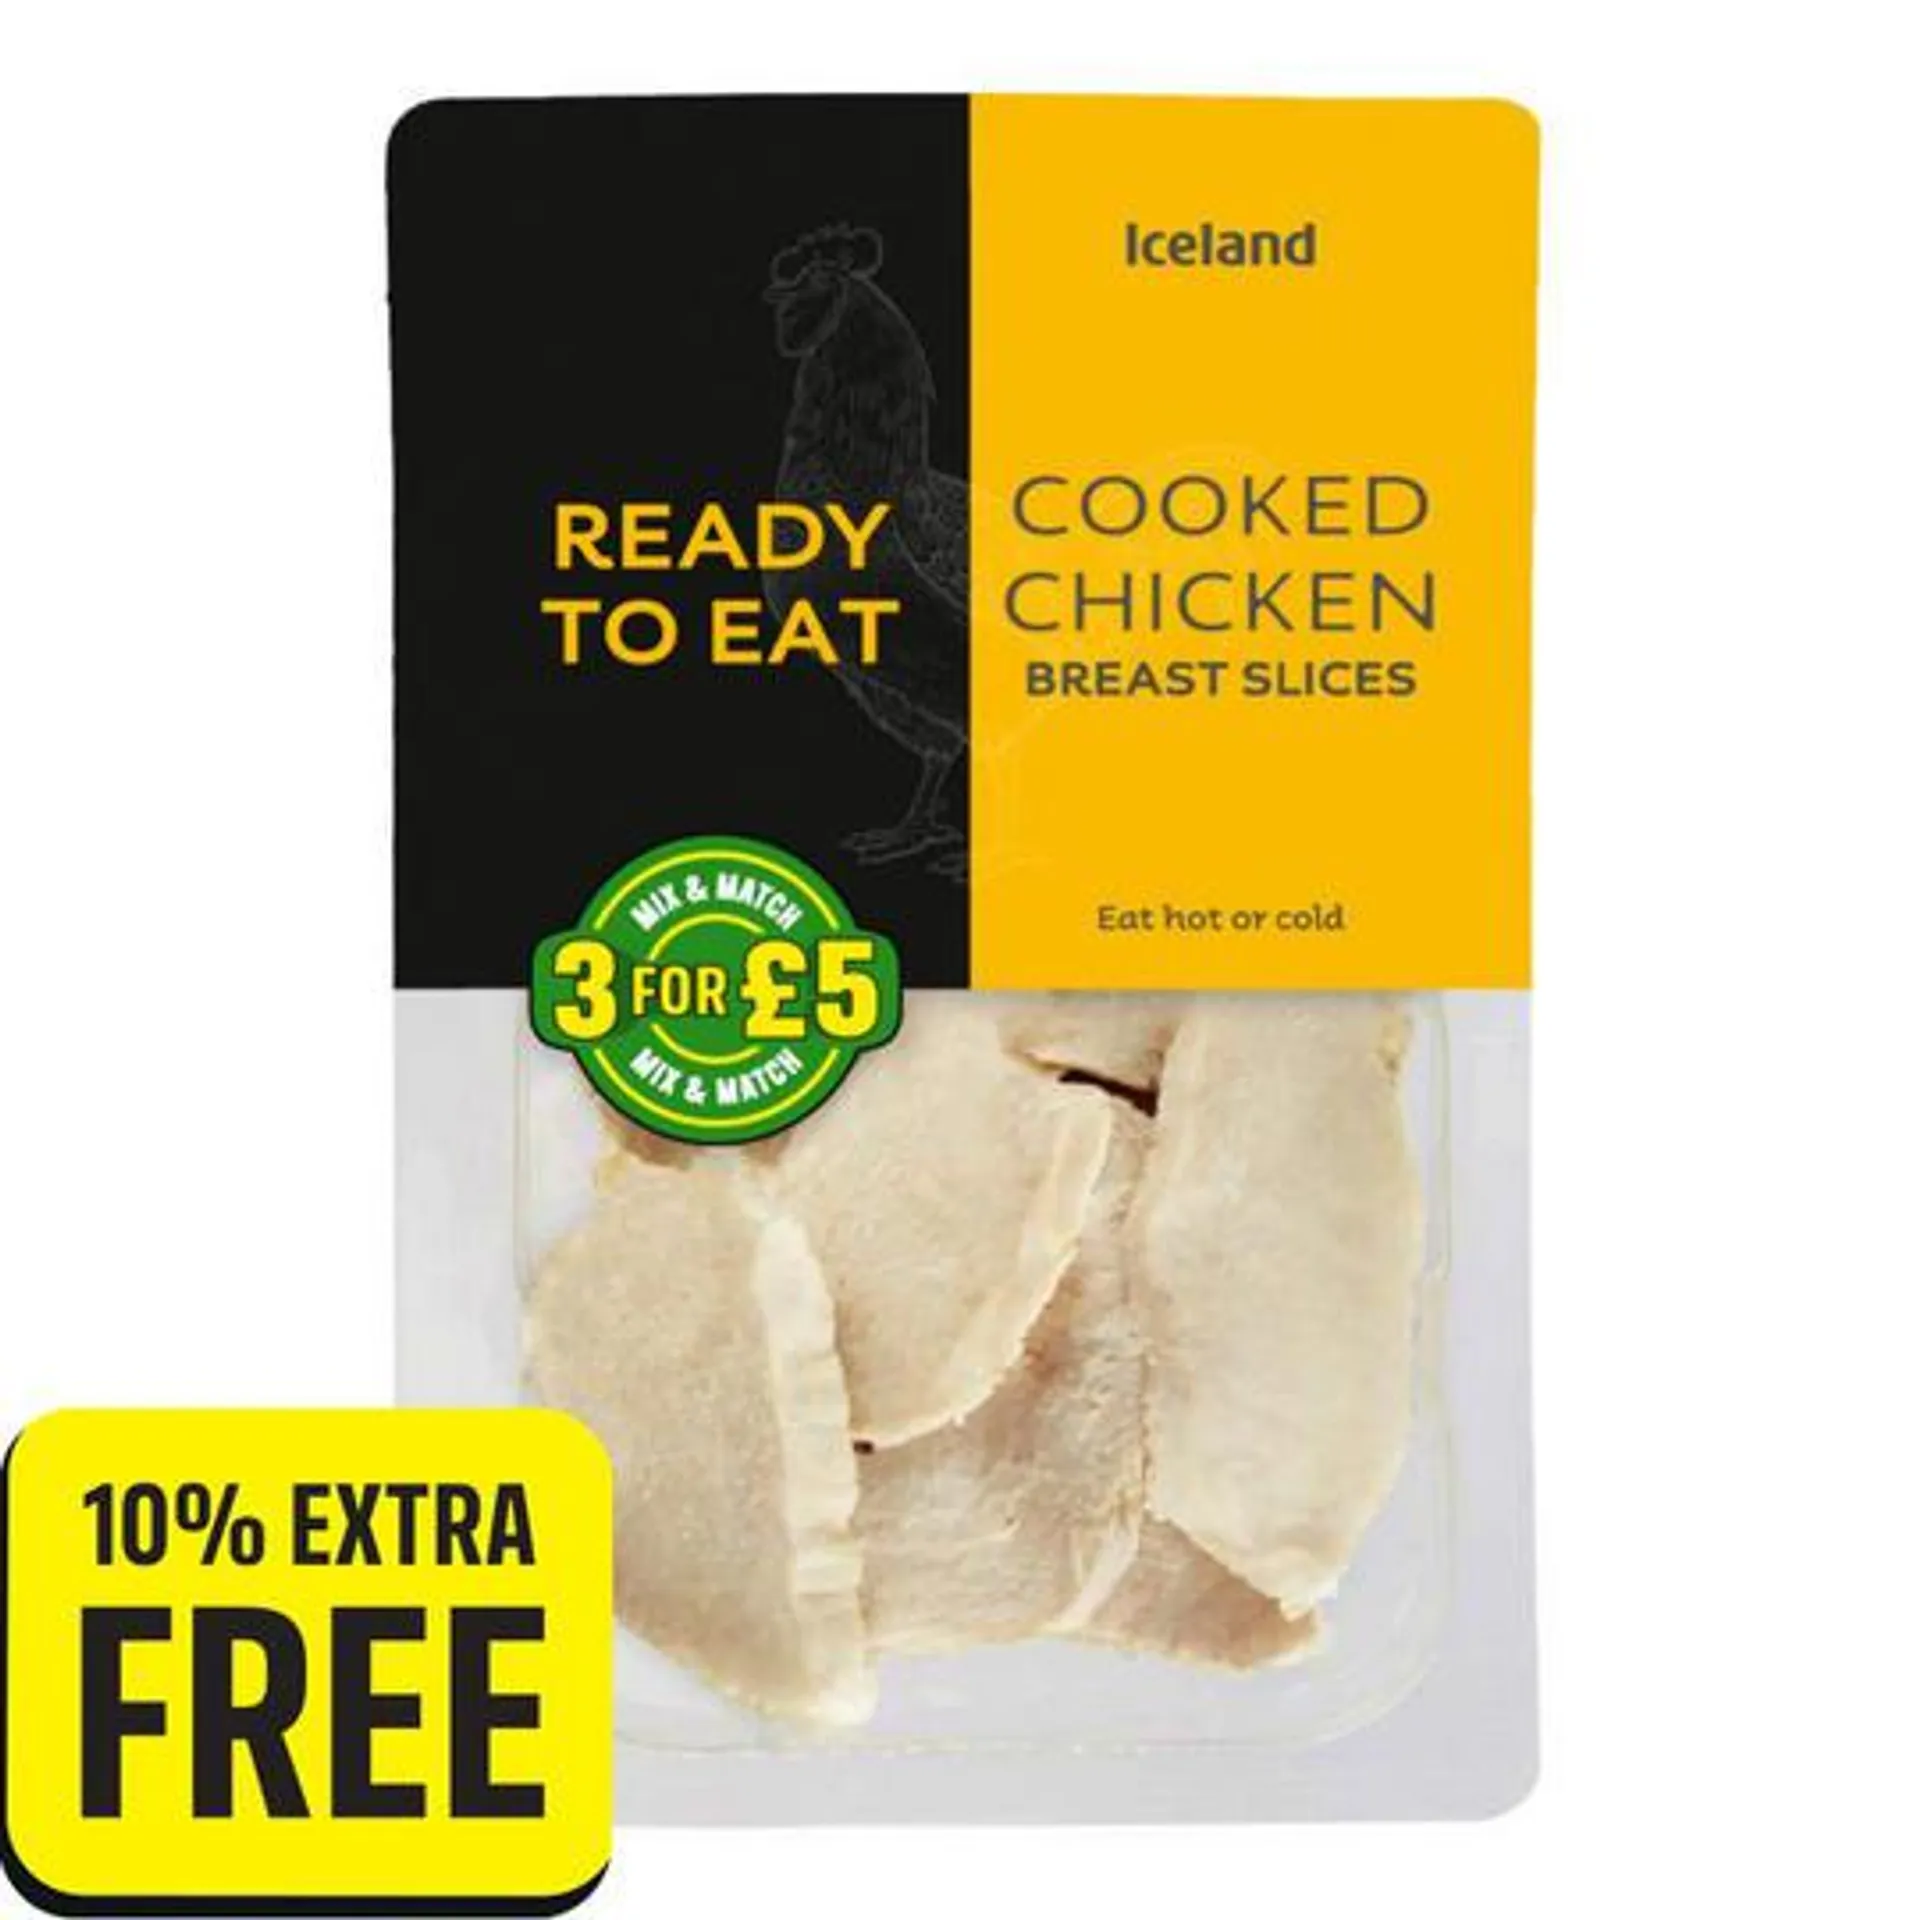 Iceland Ready to Eat Cooked Chicken Breast Slices 180g (10% Extra Free)